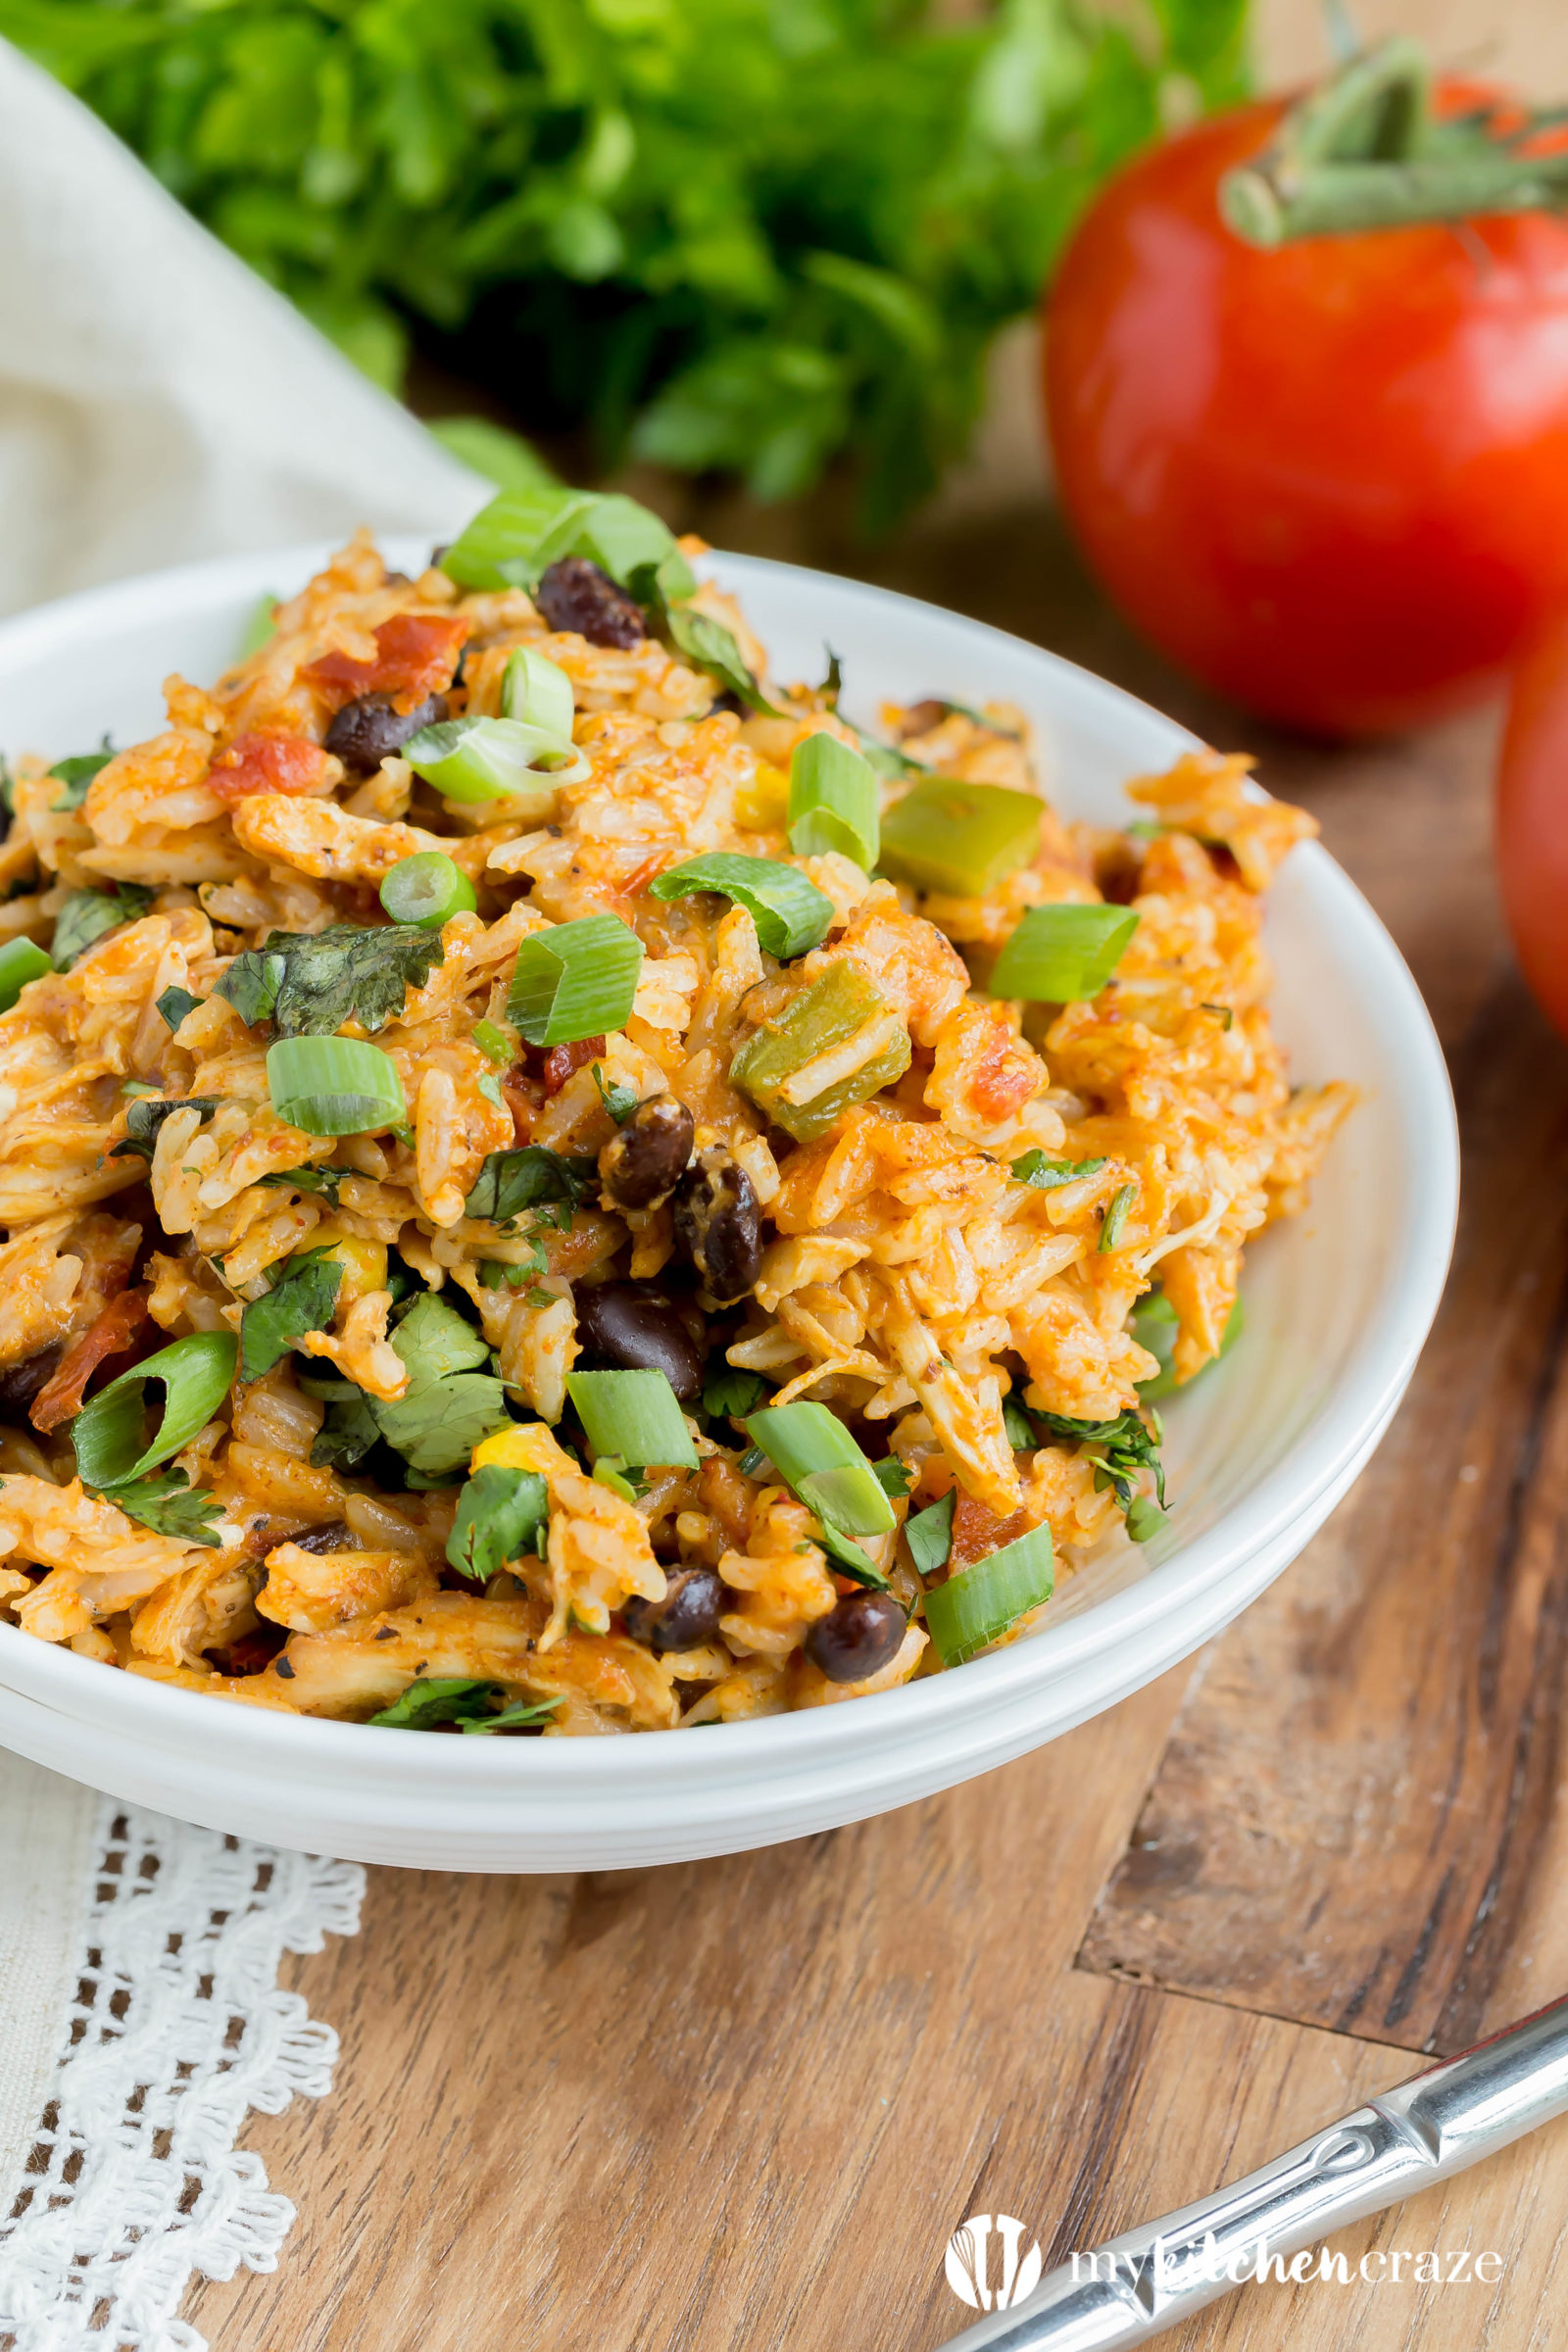 Slow Cooker Southwest Chicken and Rice is a meal you won't want to pass up. This dish has everything you need for a yummy dinner. Loaded with chicken, veggies, rice and of course cheese.